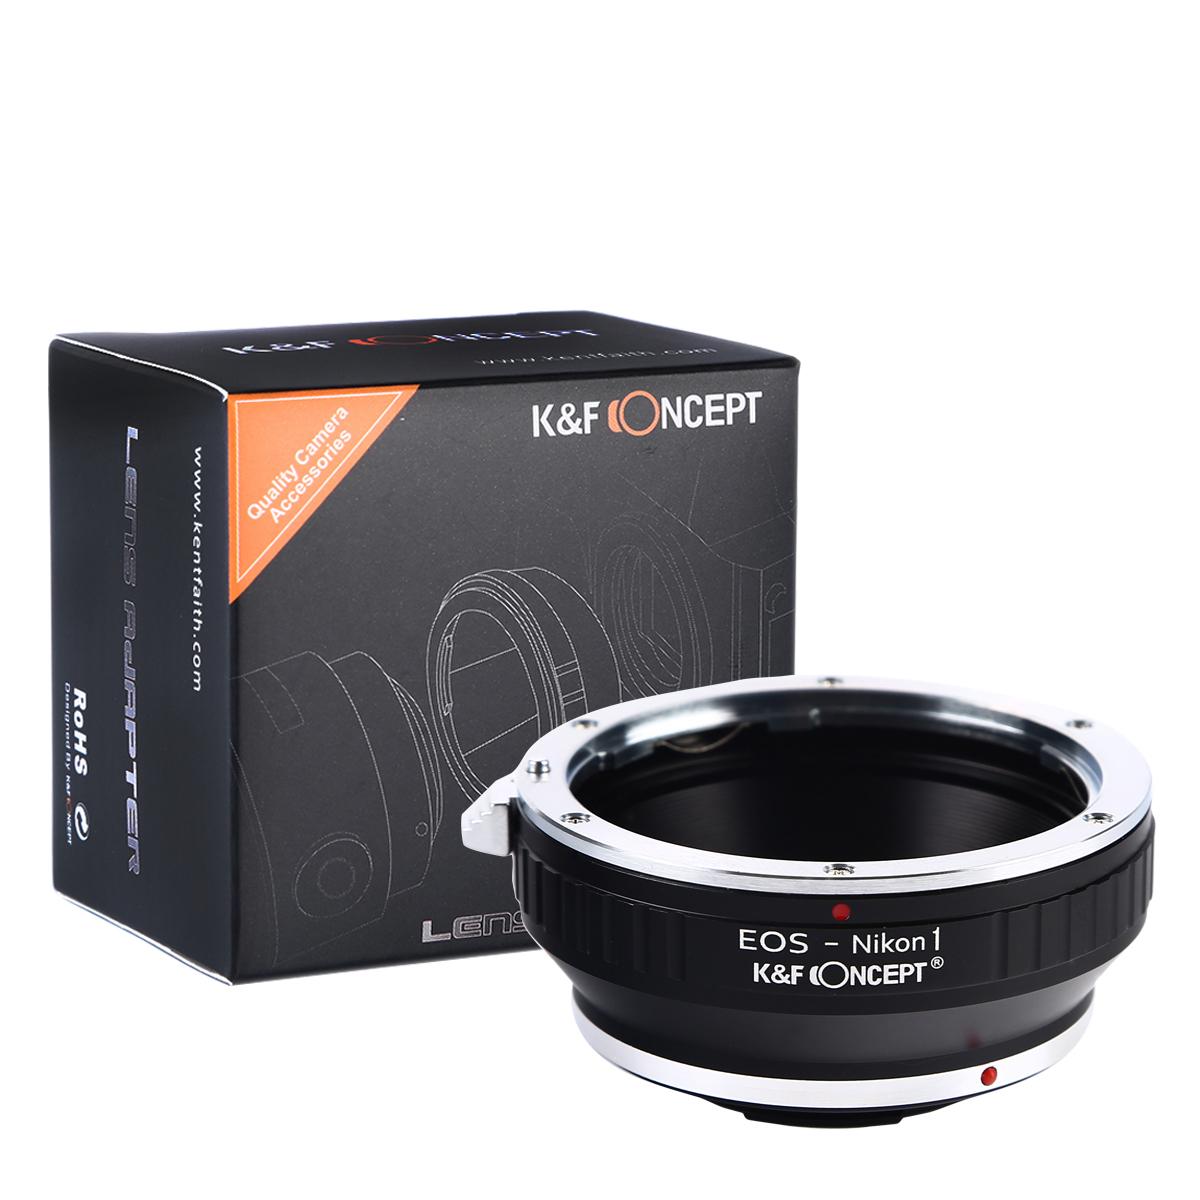 Image of K&F Concept Lens Mount Adapter, Canon EOS EF Mount Lens to Nikon 1-Series Camera, fits Nikon V1, J1 Mirrorless Cameras, fits EOS EF, and EF-S Lenses